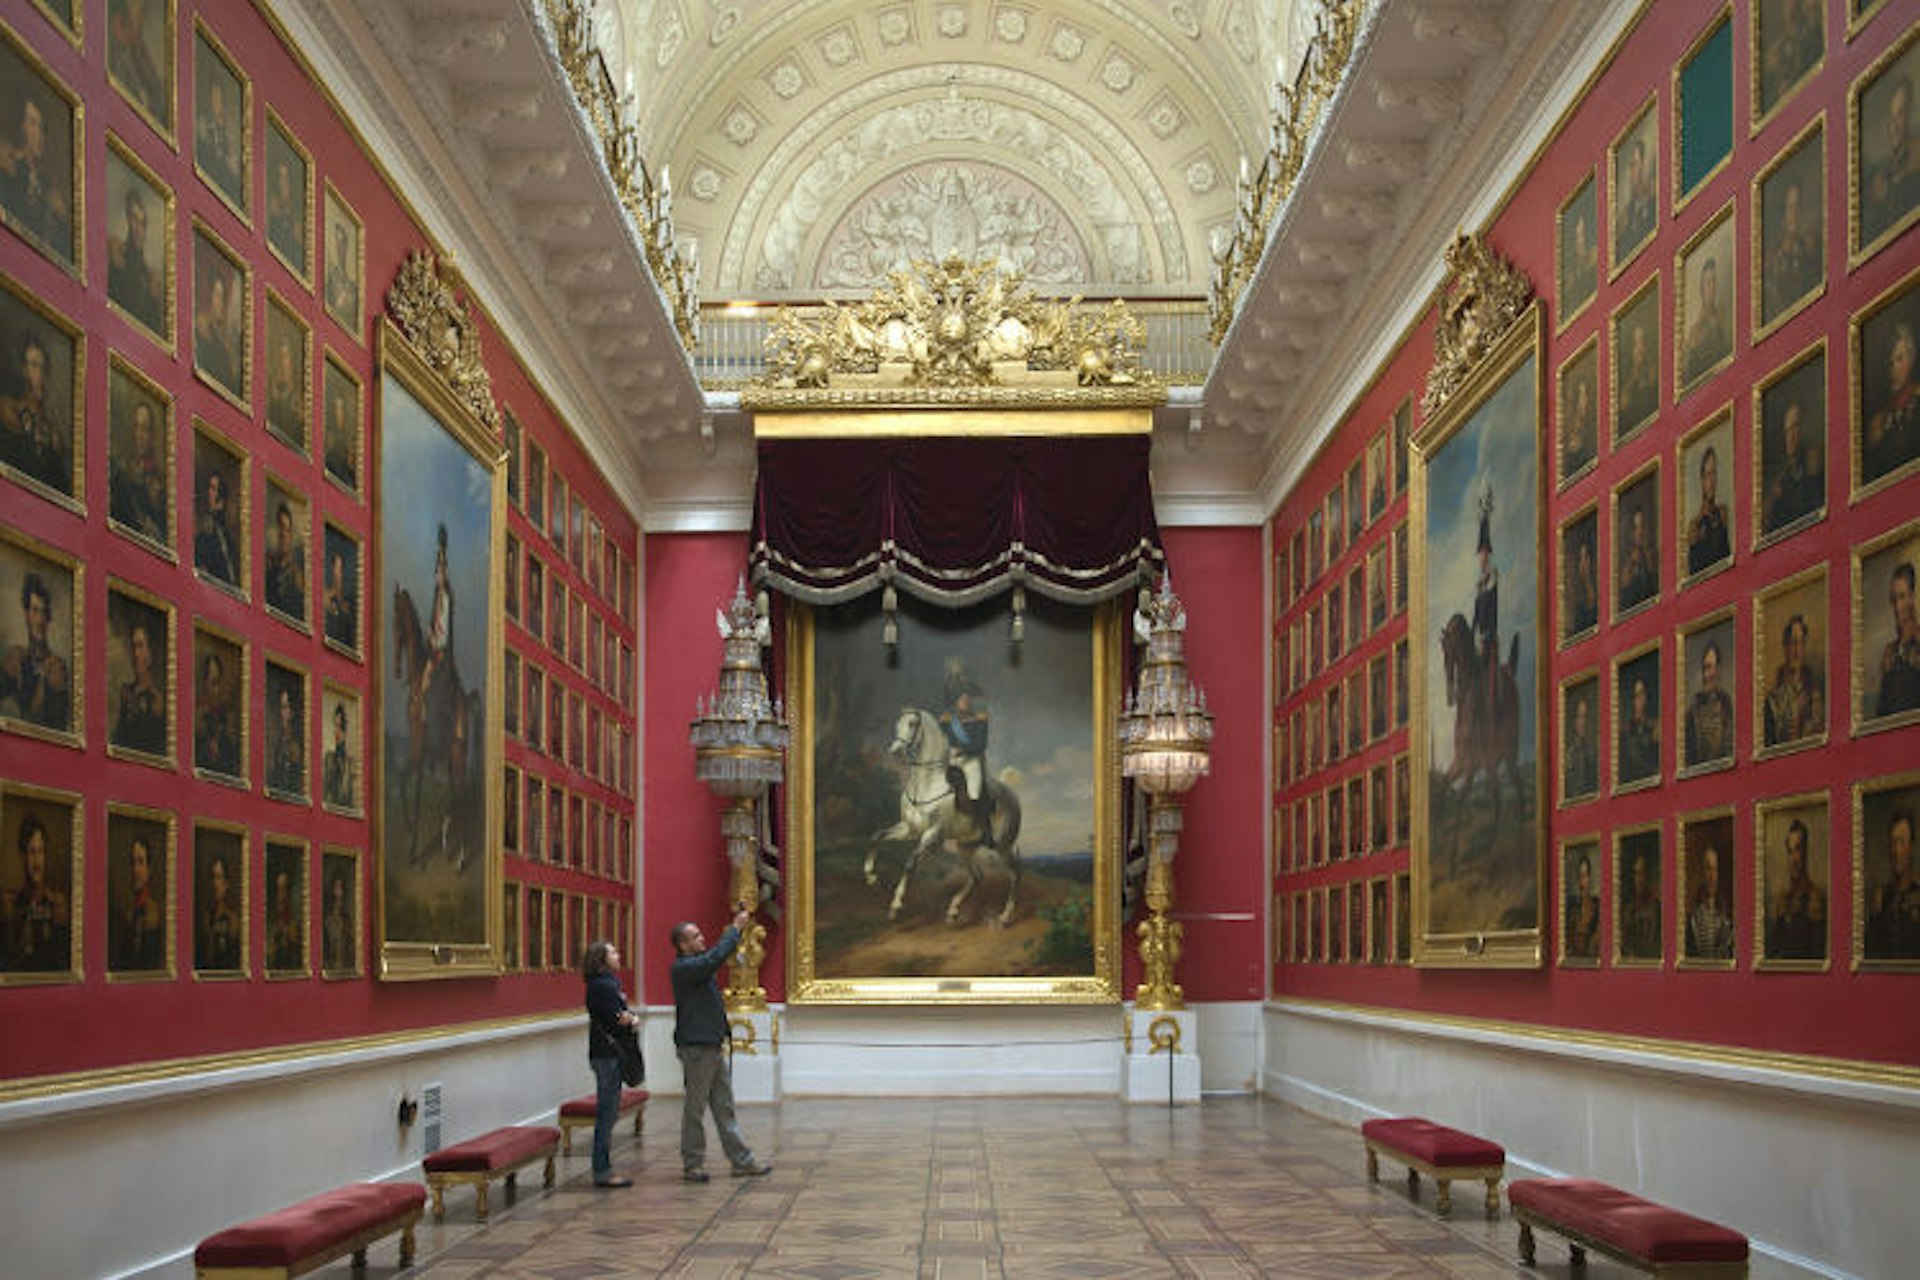 Gallery of 1812, The State Hermitage Museum. Image by Izzet Keribar / Lonely Planet Images / Getty Images